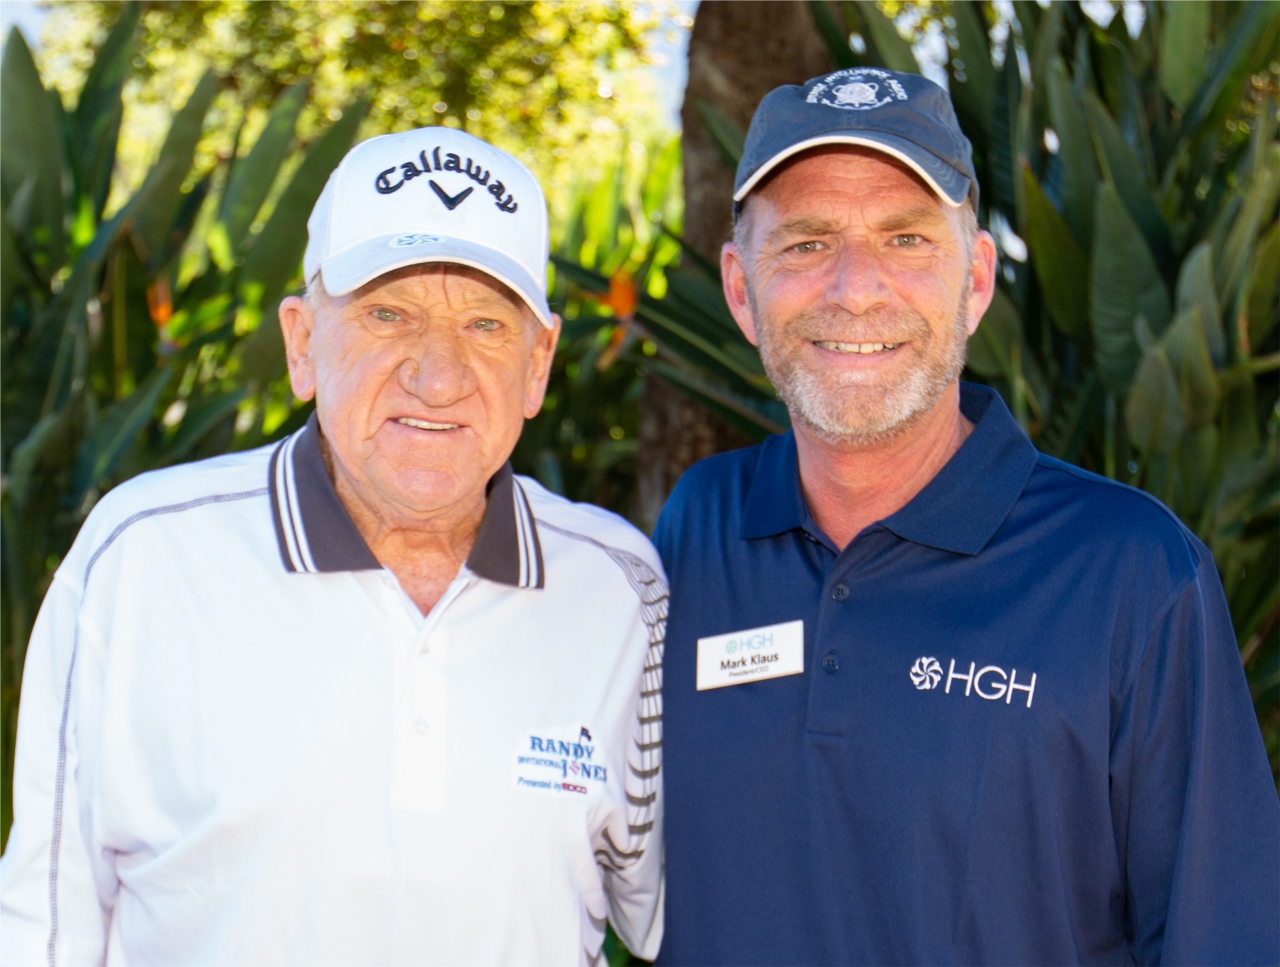 Randy Jones, San Diego Padres and long-time supporter of HGH, with Mark Klaus, HGH President/CEO, at the 2018 Golf Classic.